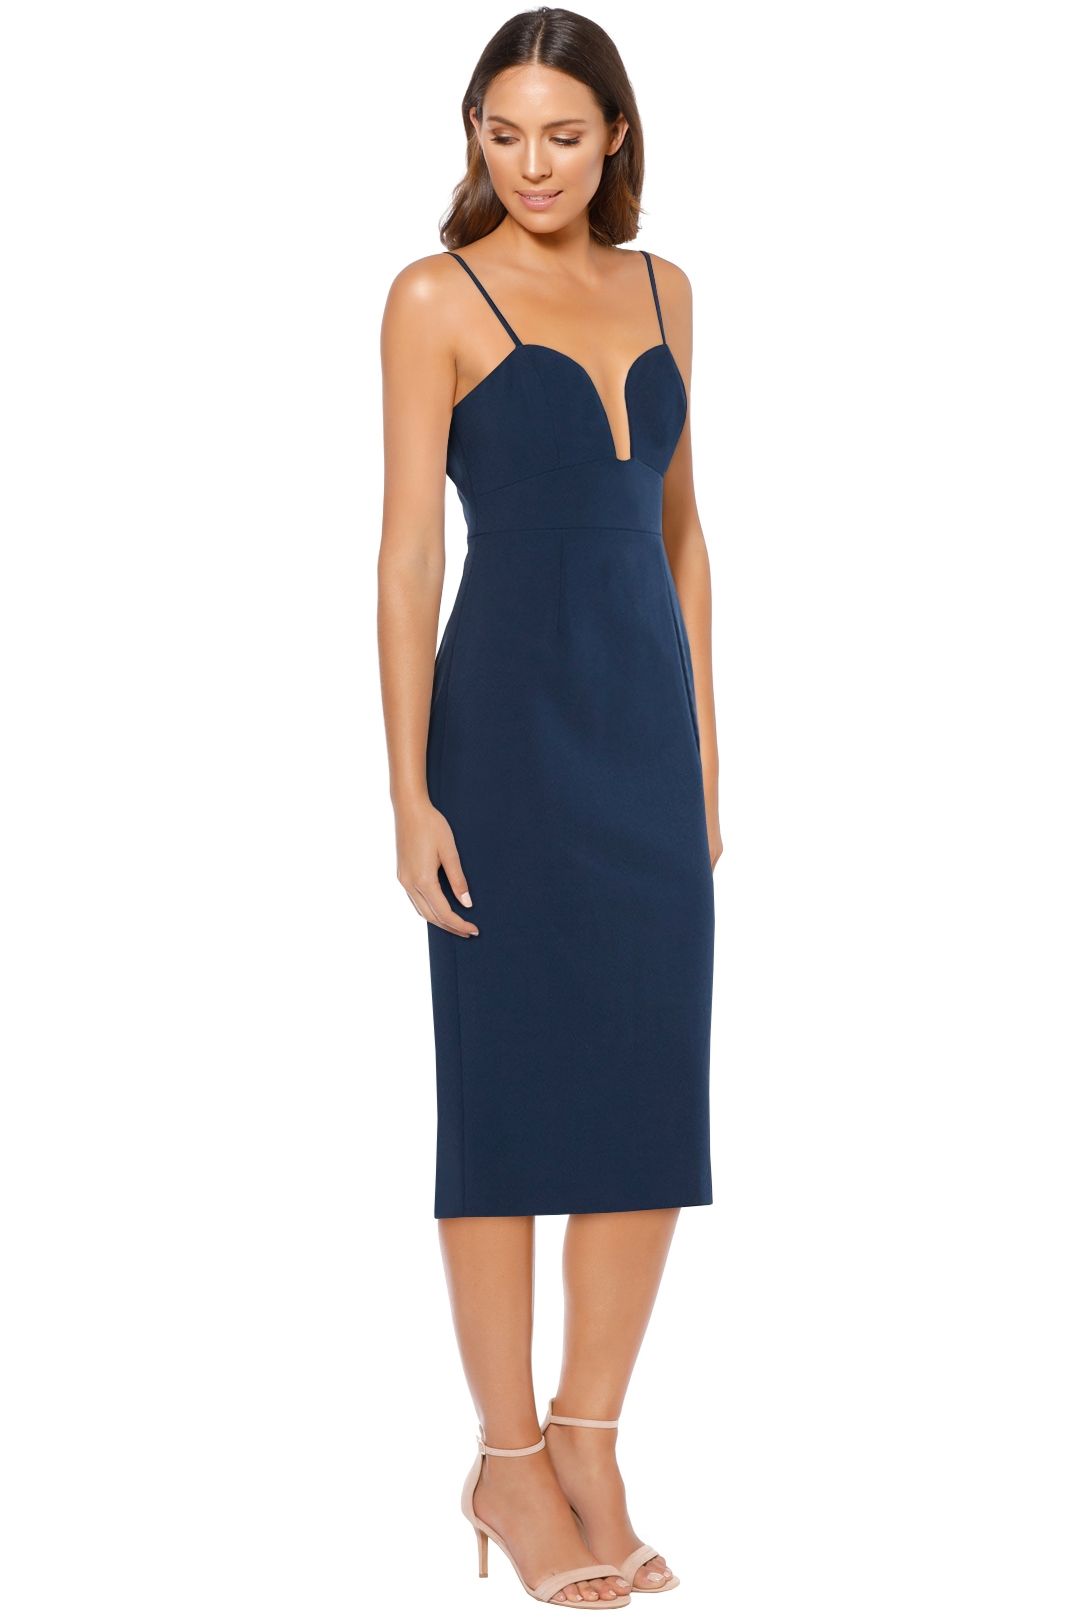 Talulah - Intimate Bodycon - Navy - Side